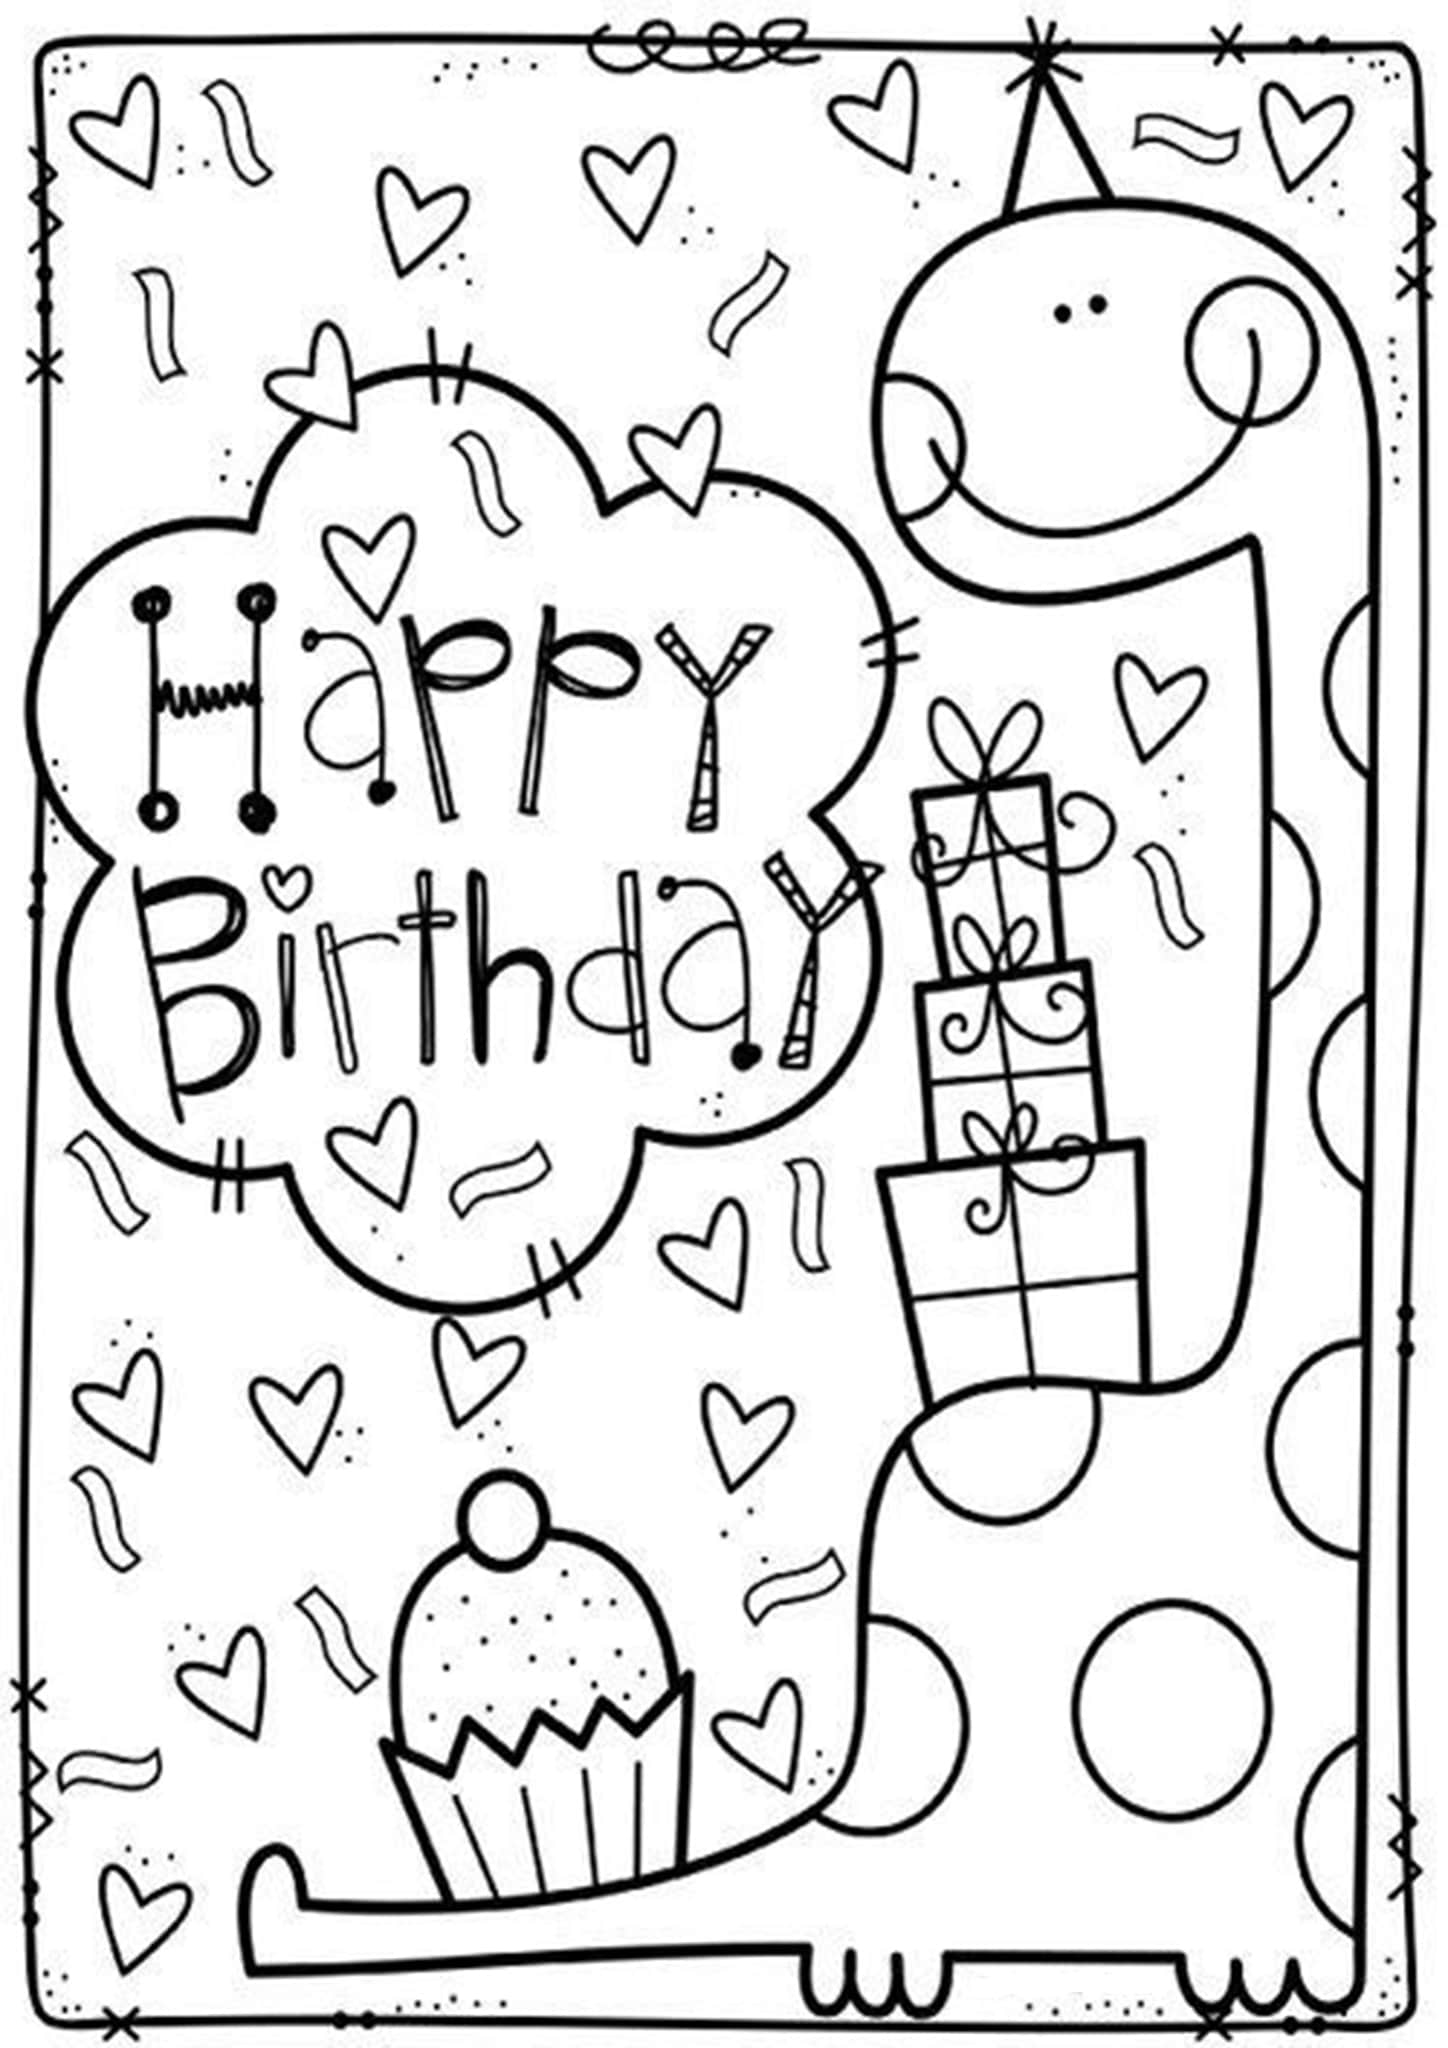 Happy Birthday Free Printable Coloring Pages